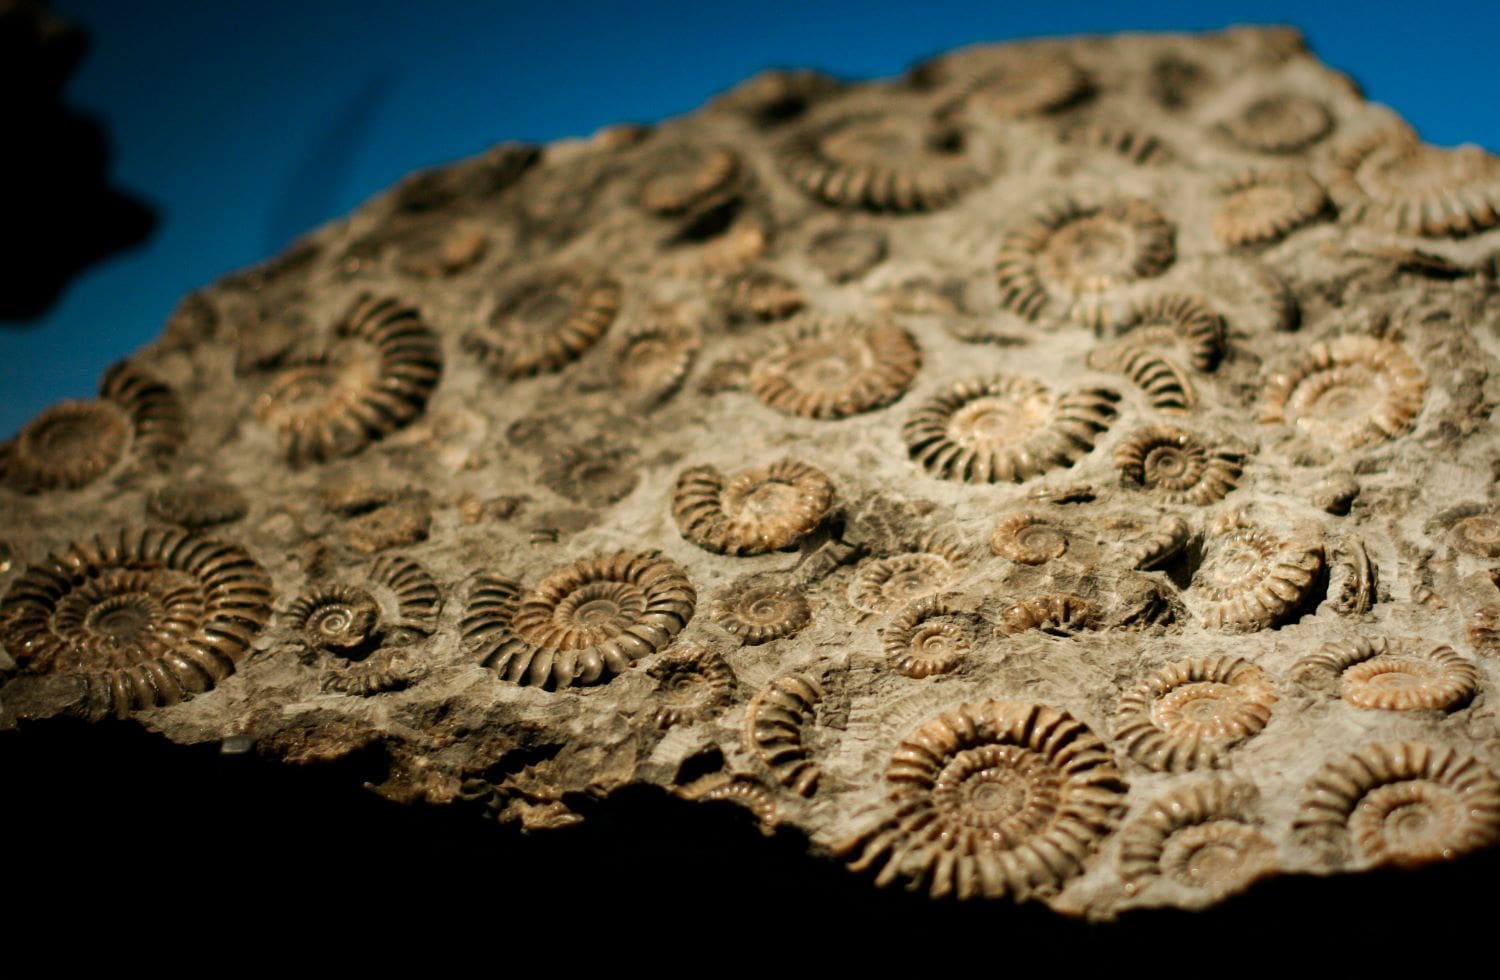 a slab of rock with a bunch of small fossilized ammonite shells, the shape of their shells are circular and coiled like a snail